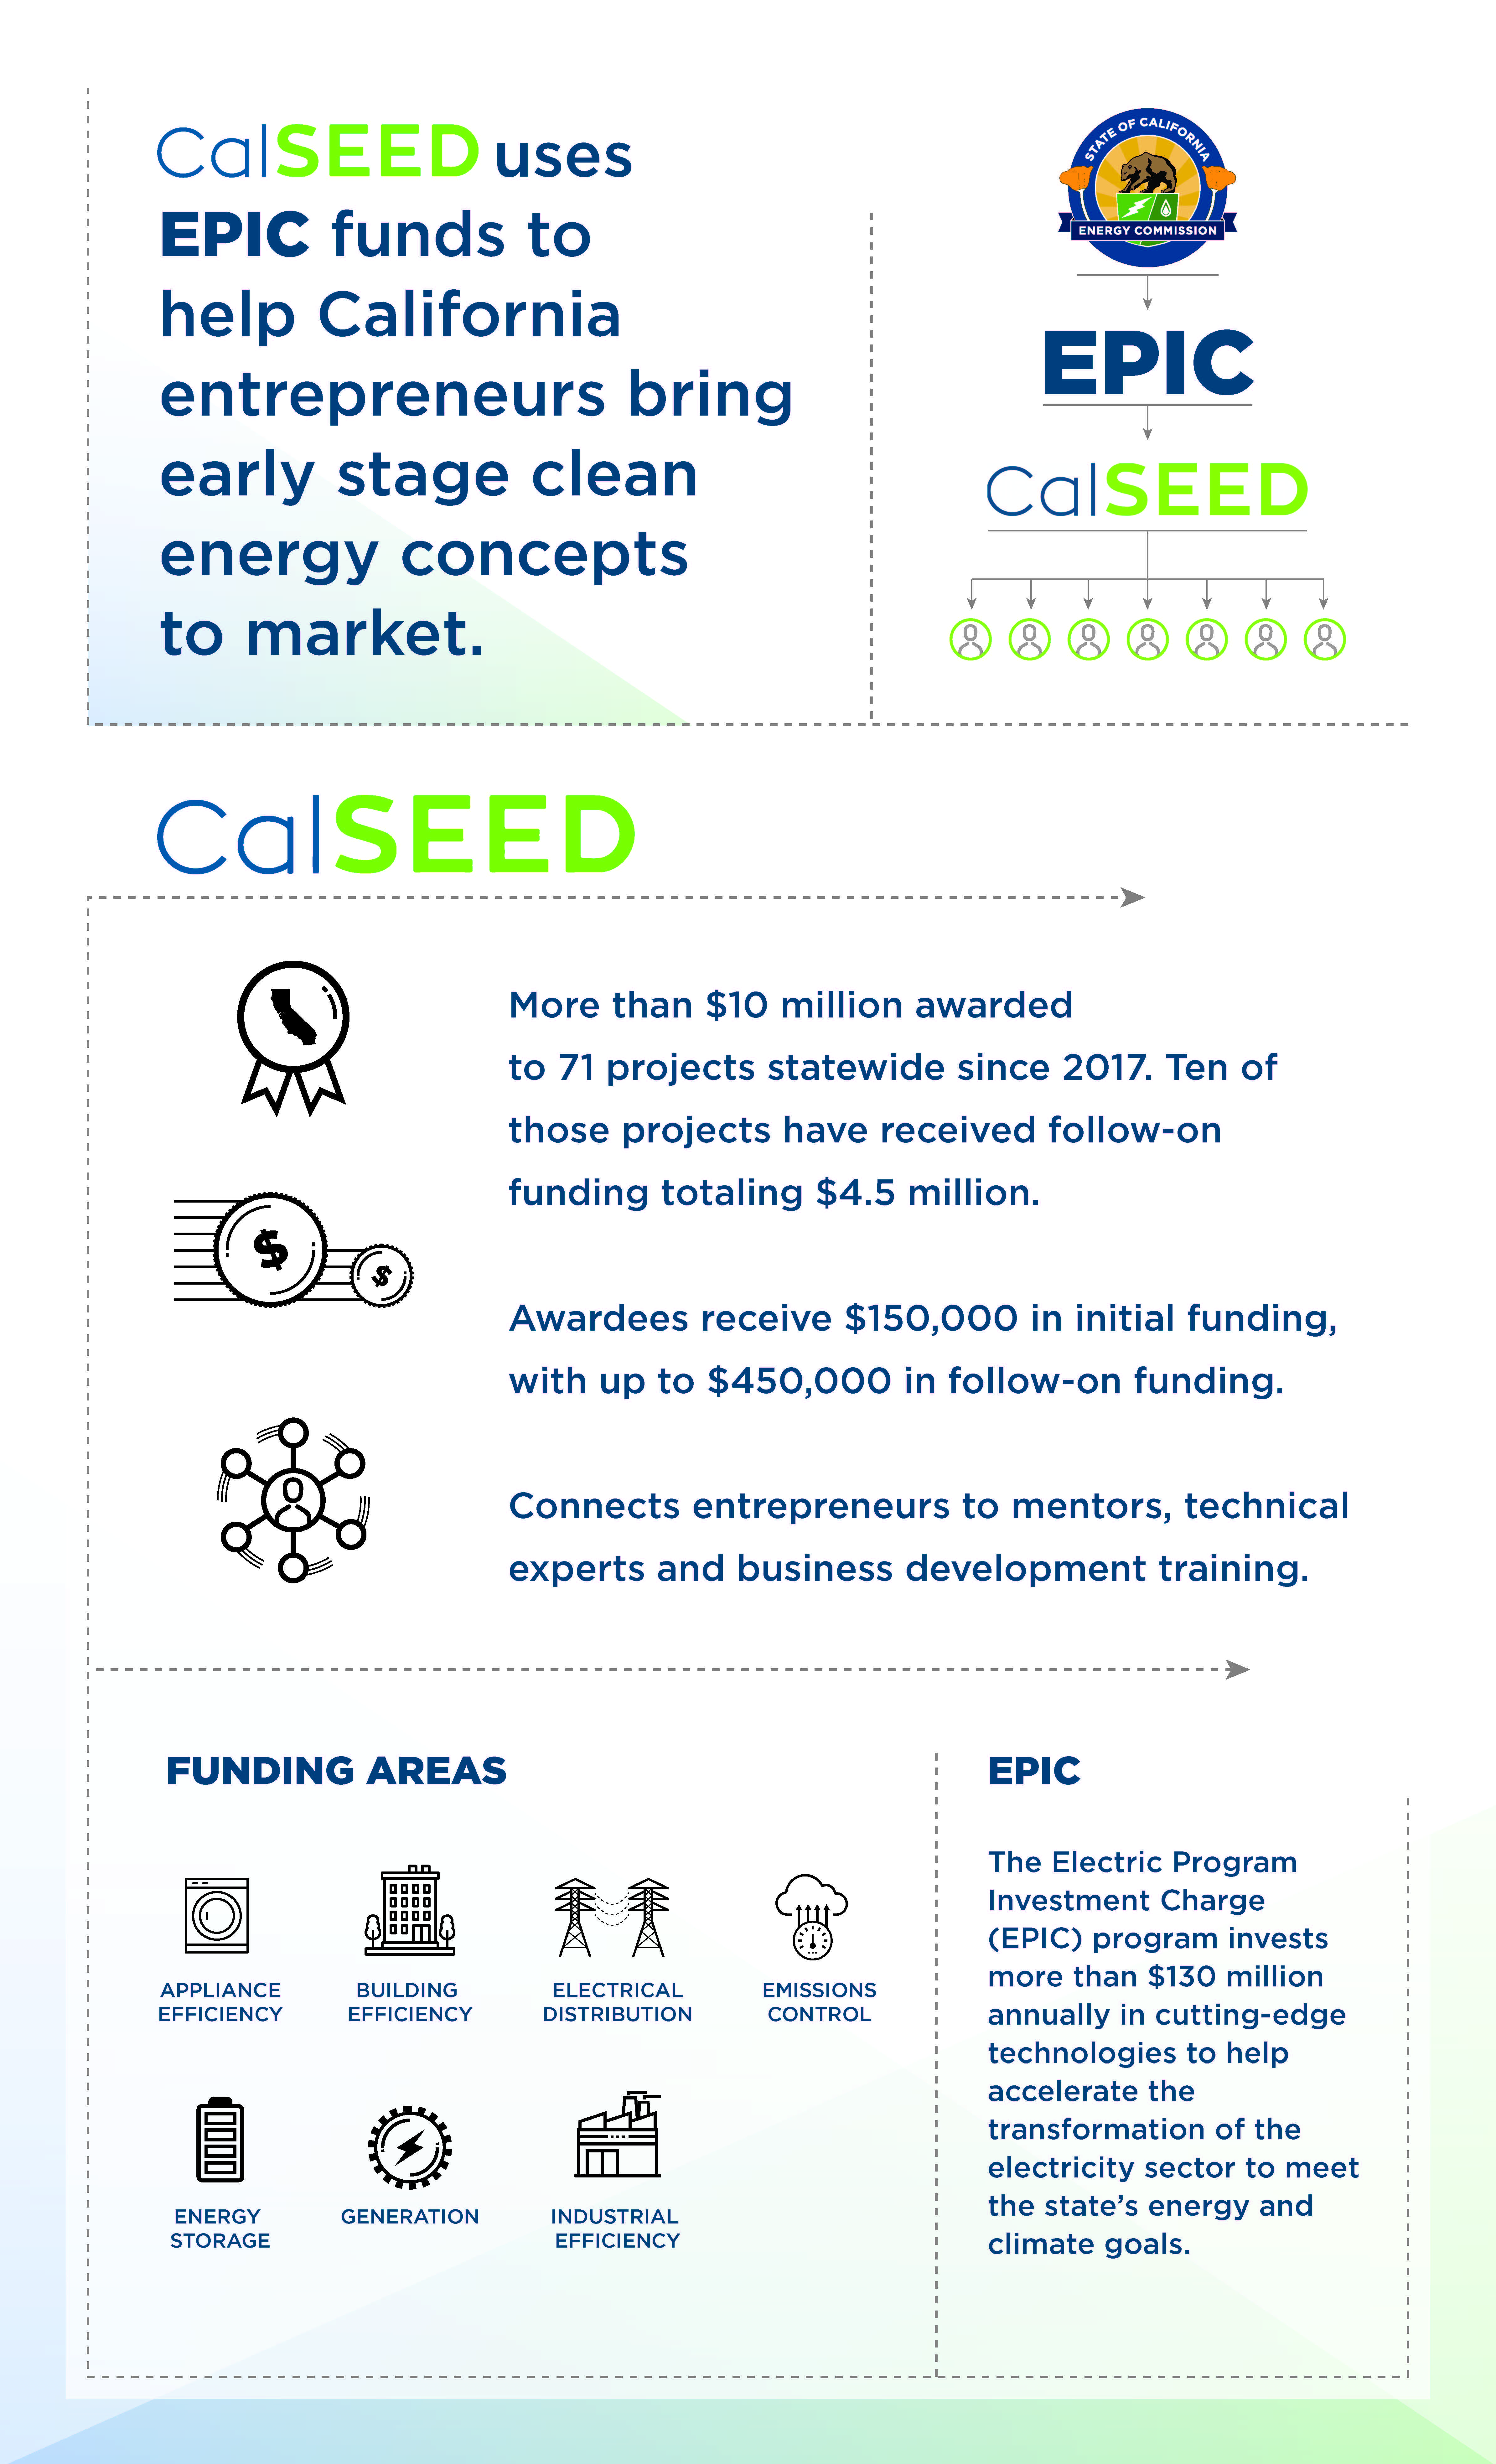 CalSEED information on 71 projects awarded more than $10 million. The Electric Program Investment Charge (EPIC) program invests more than $130 million annually in cutting edge technologies